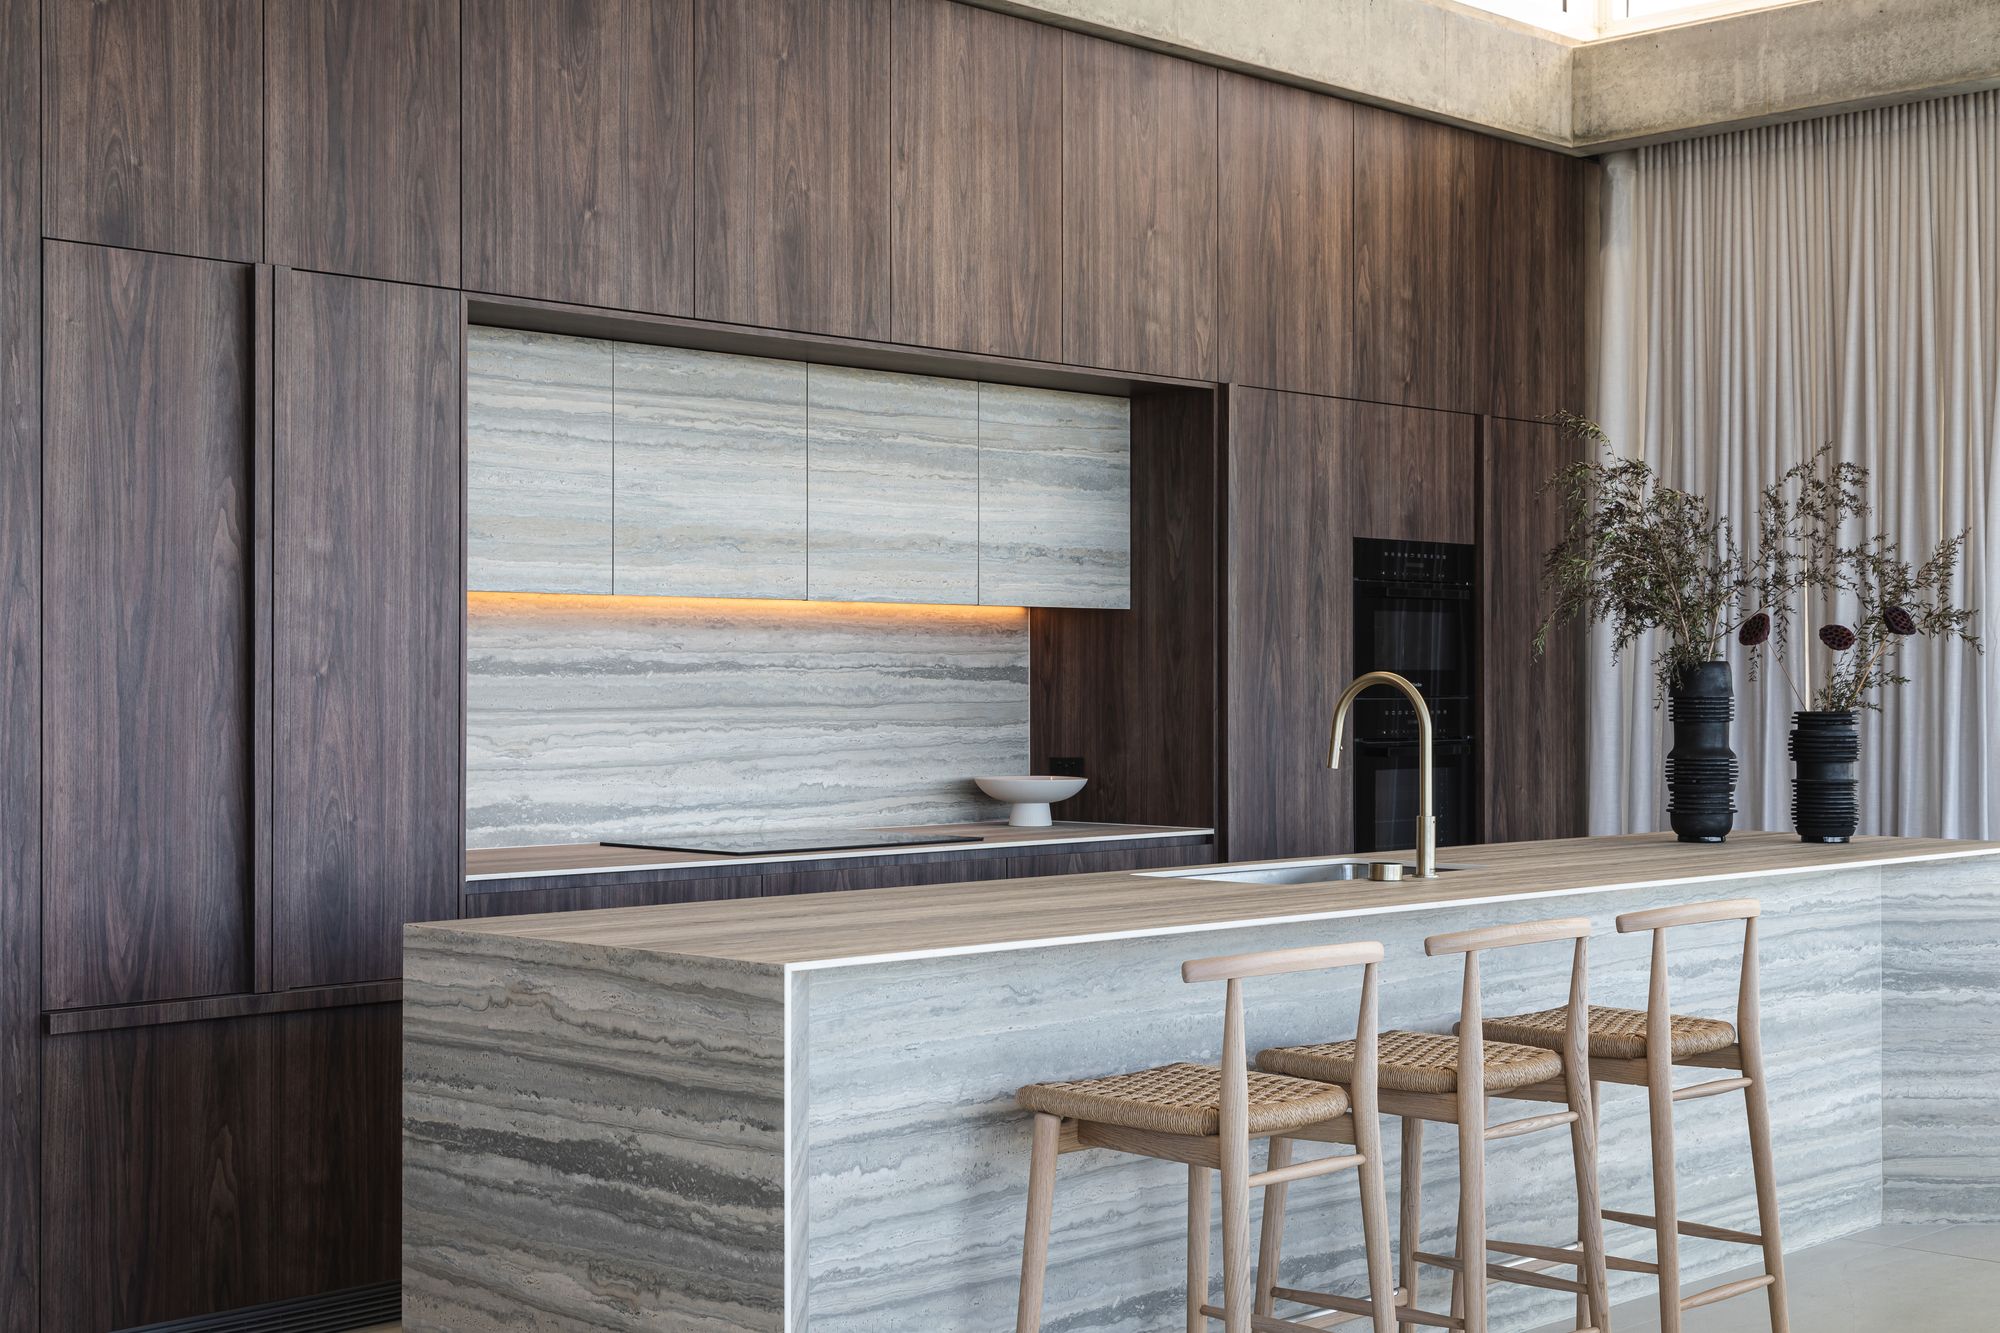 Cliffhanger by Joe Adsett Architects showing the interior view of the kitchen with timber veneer and marble